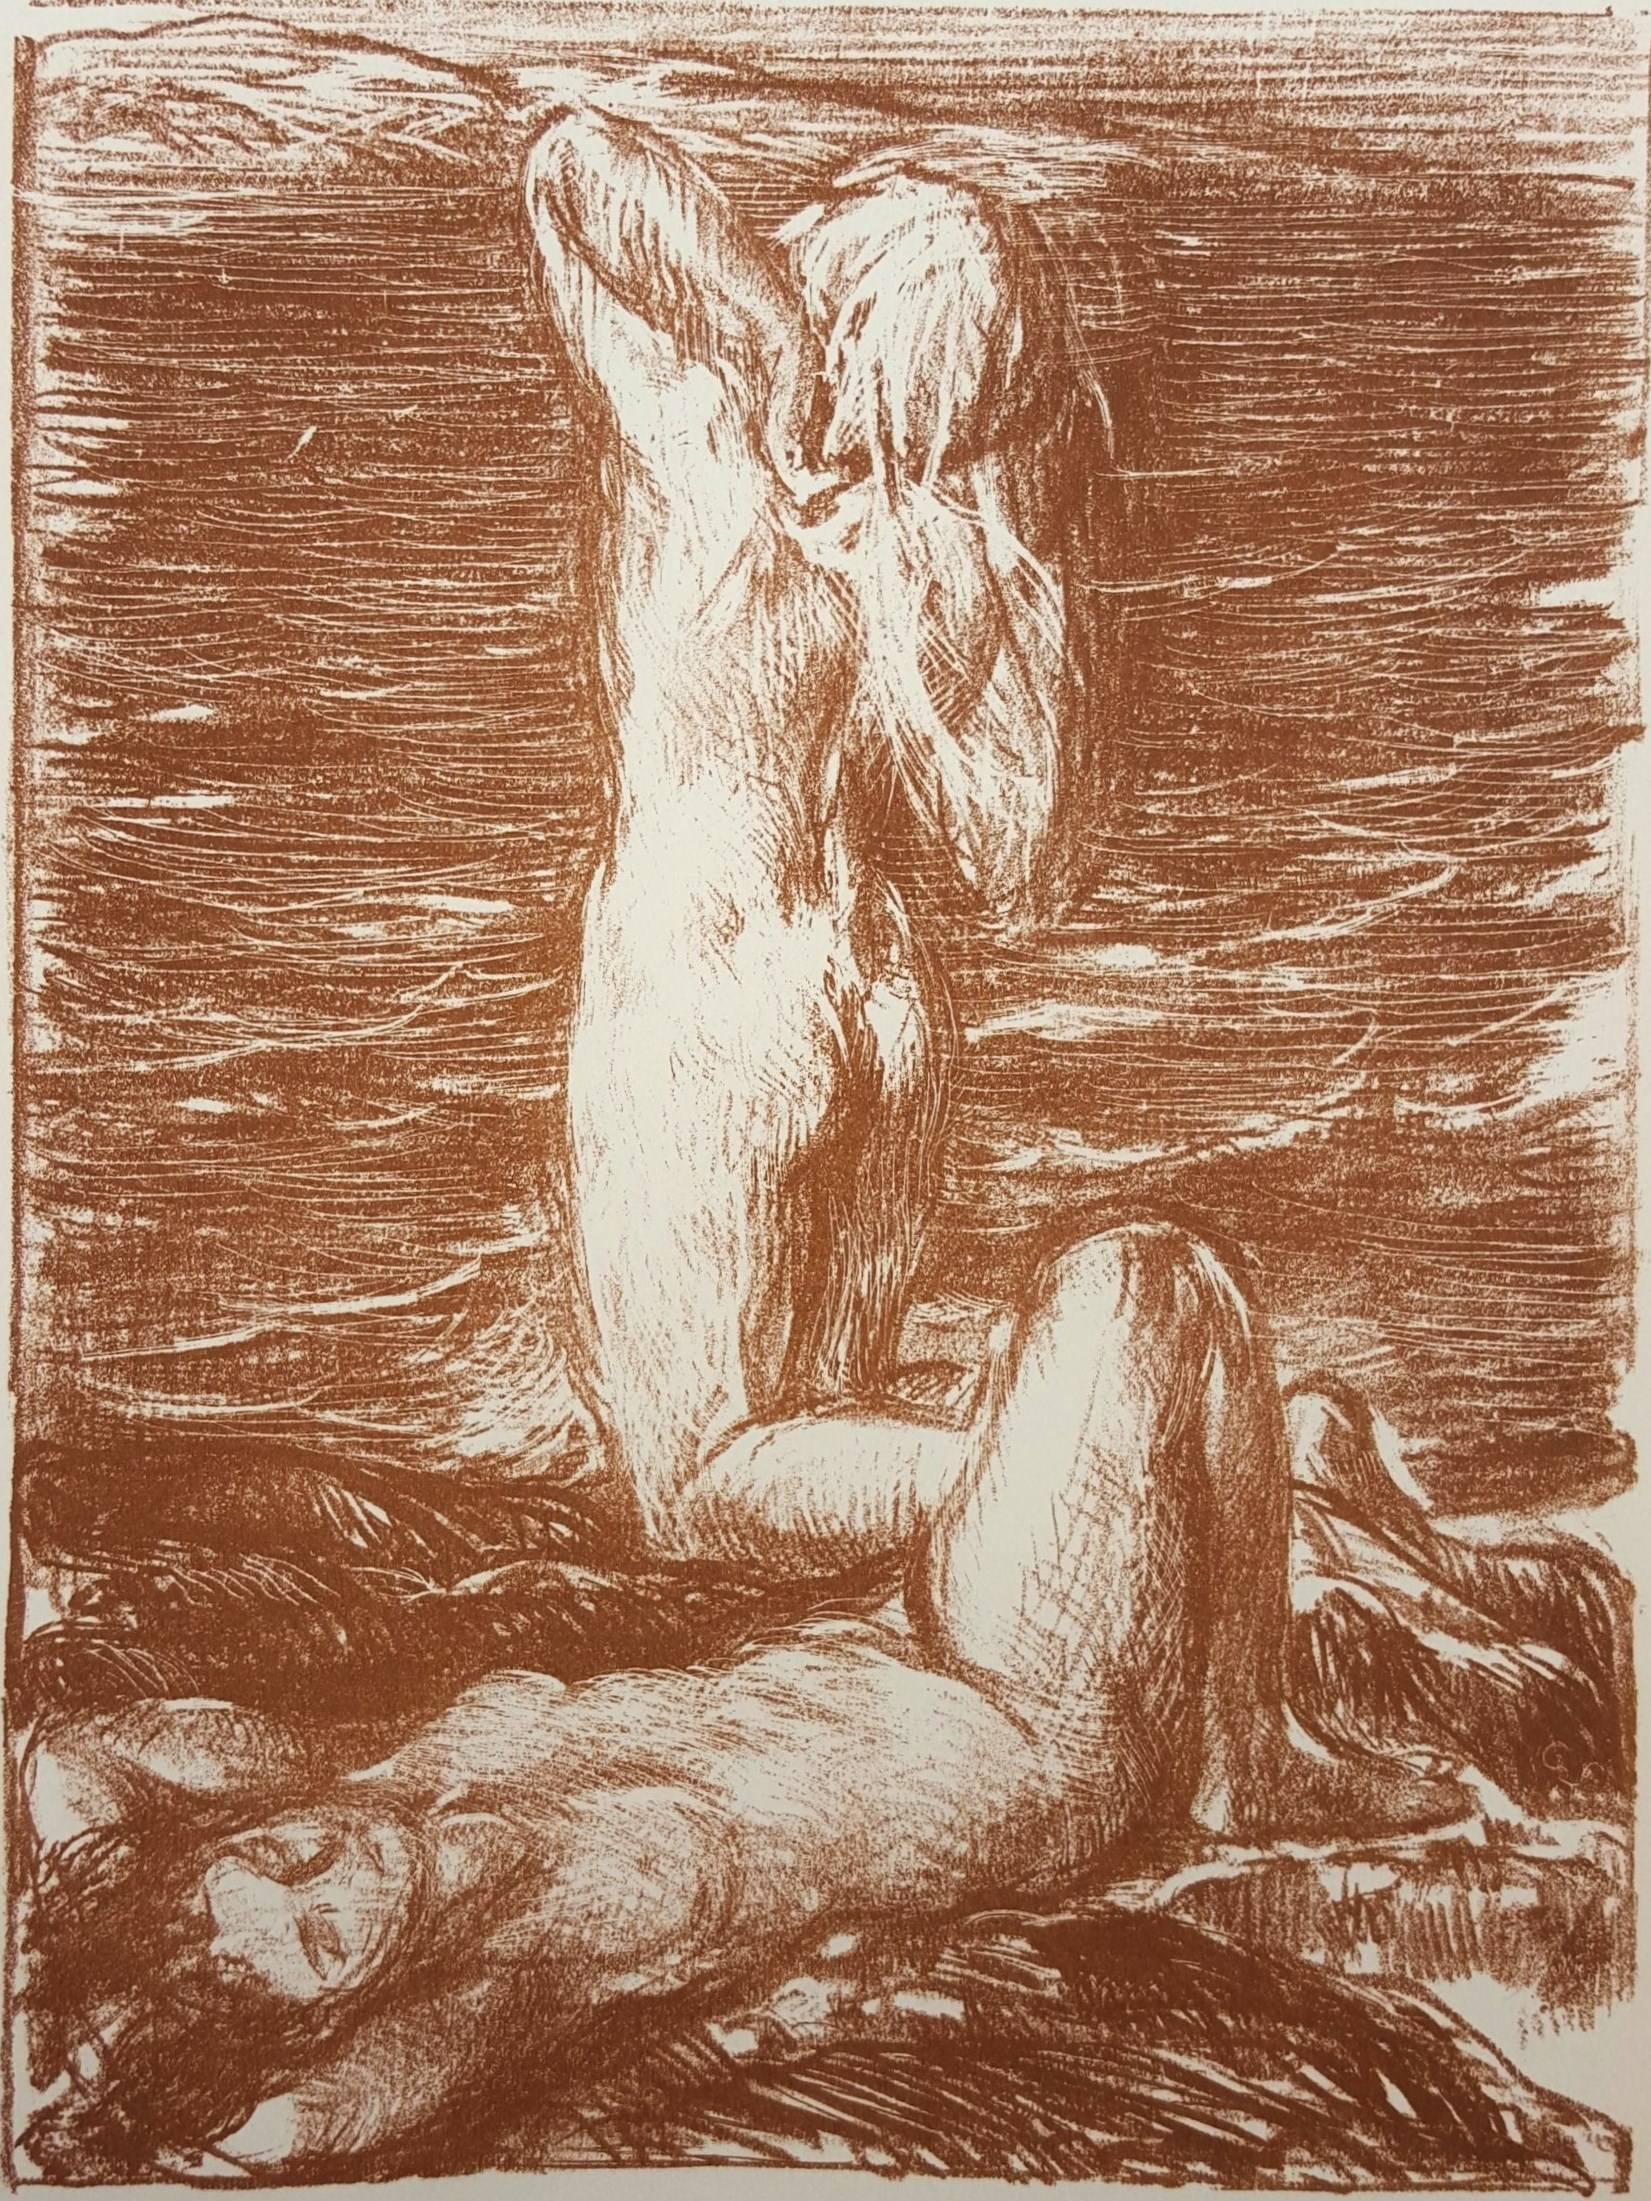 Charles Haslewood Shannon Nude Print - La Maree Montante (The Rising Tide)